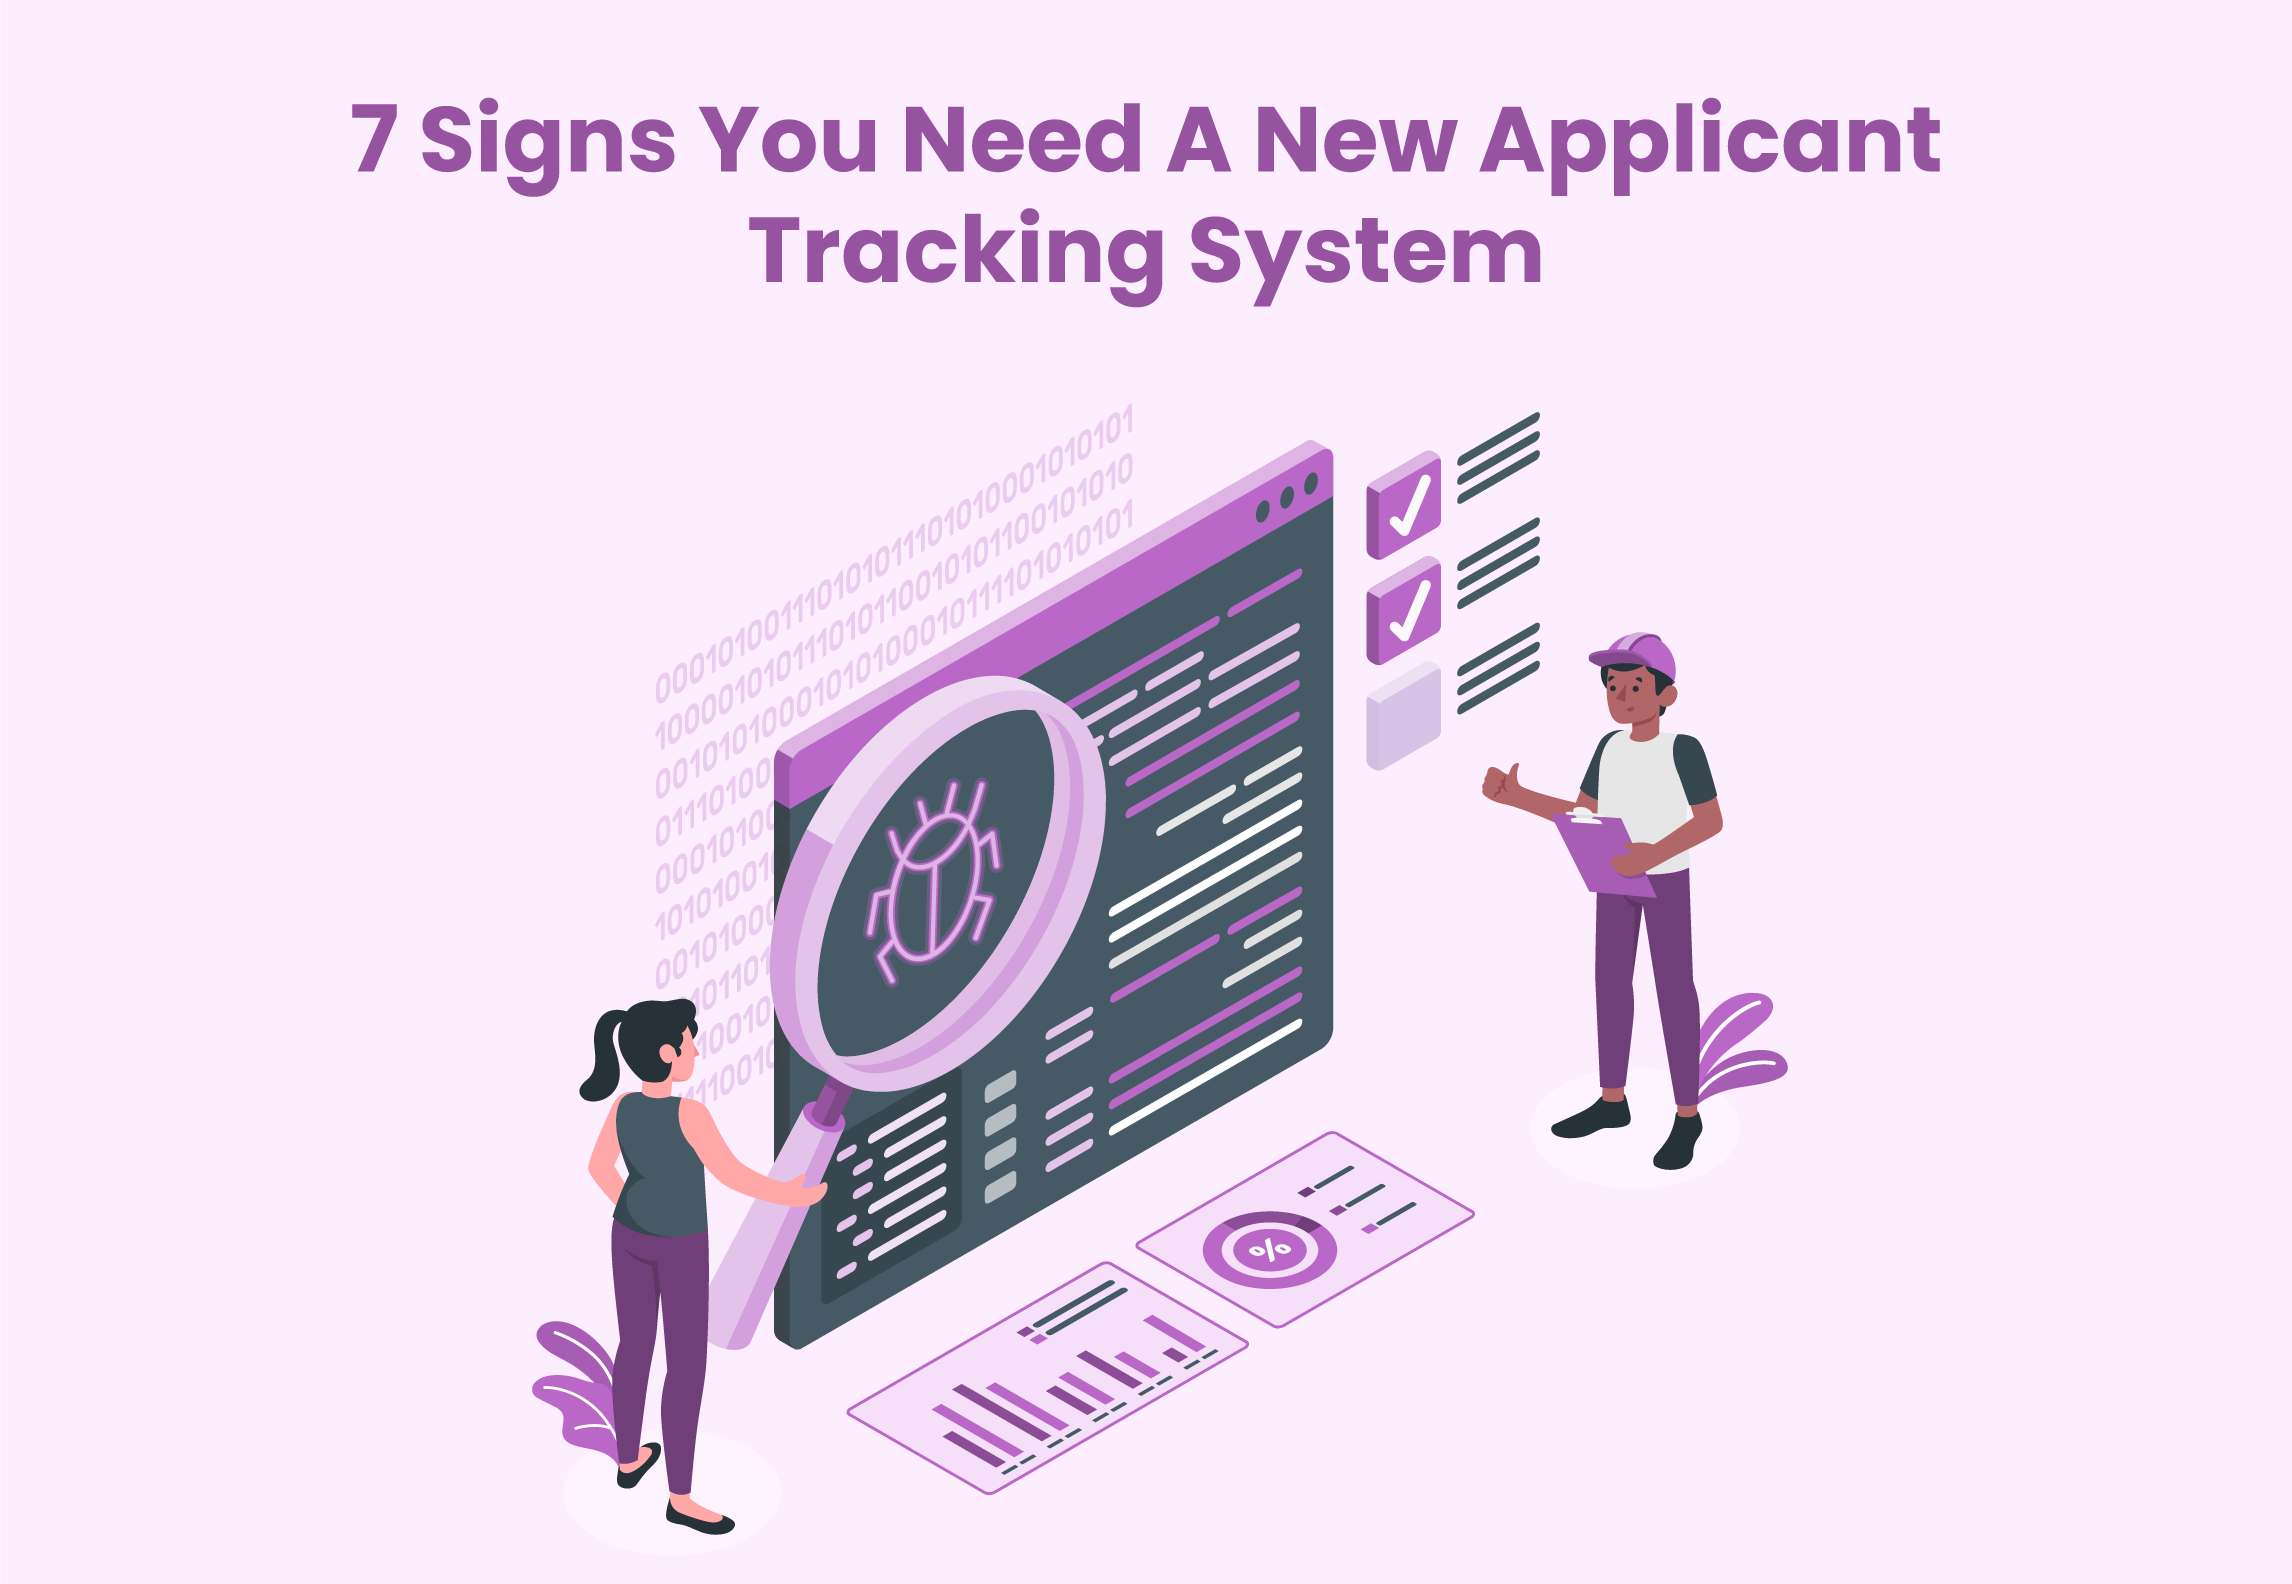 7 Signs You Need A New Applicant Tracking System - Knovator